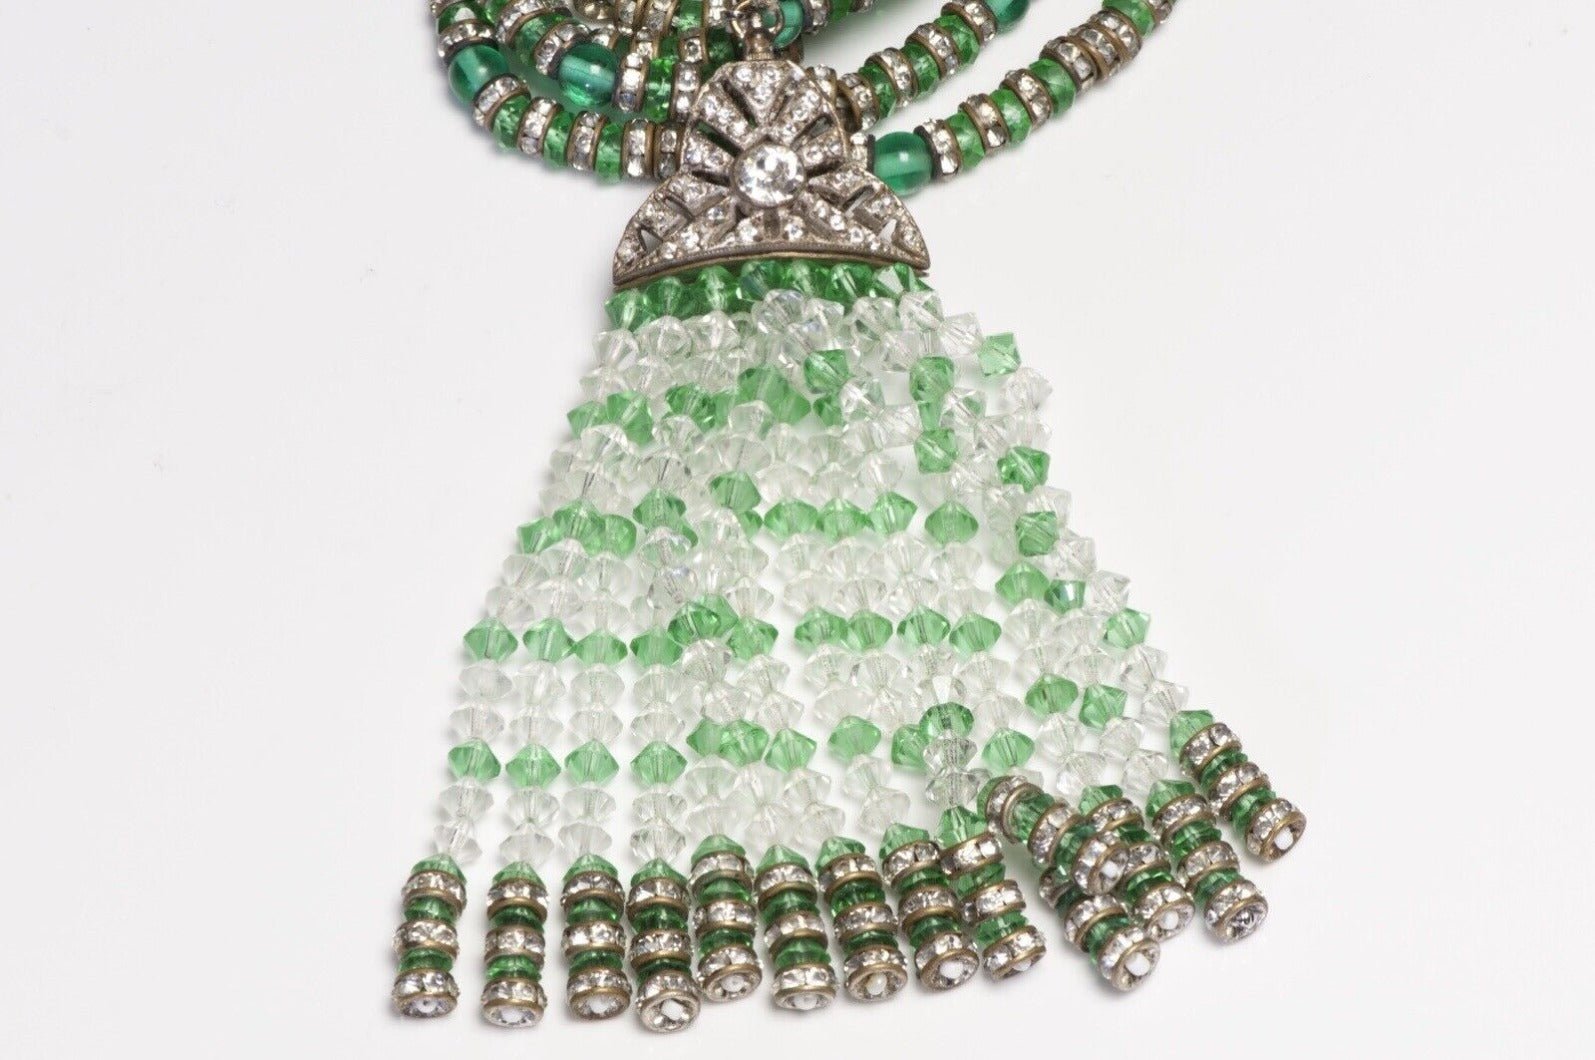 Vintage 1950’s Art Deco Style Green Glass Beads Crystal Tassel Flapper Necklace